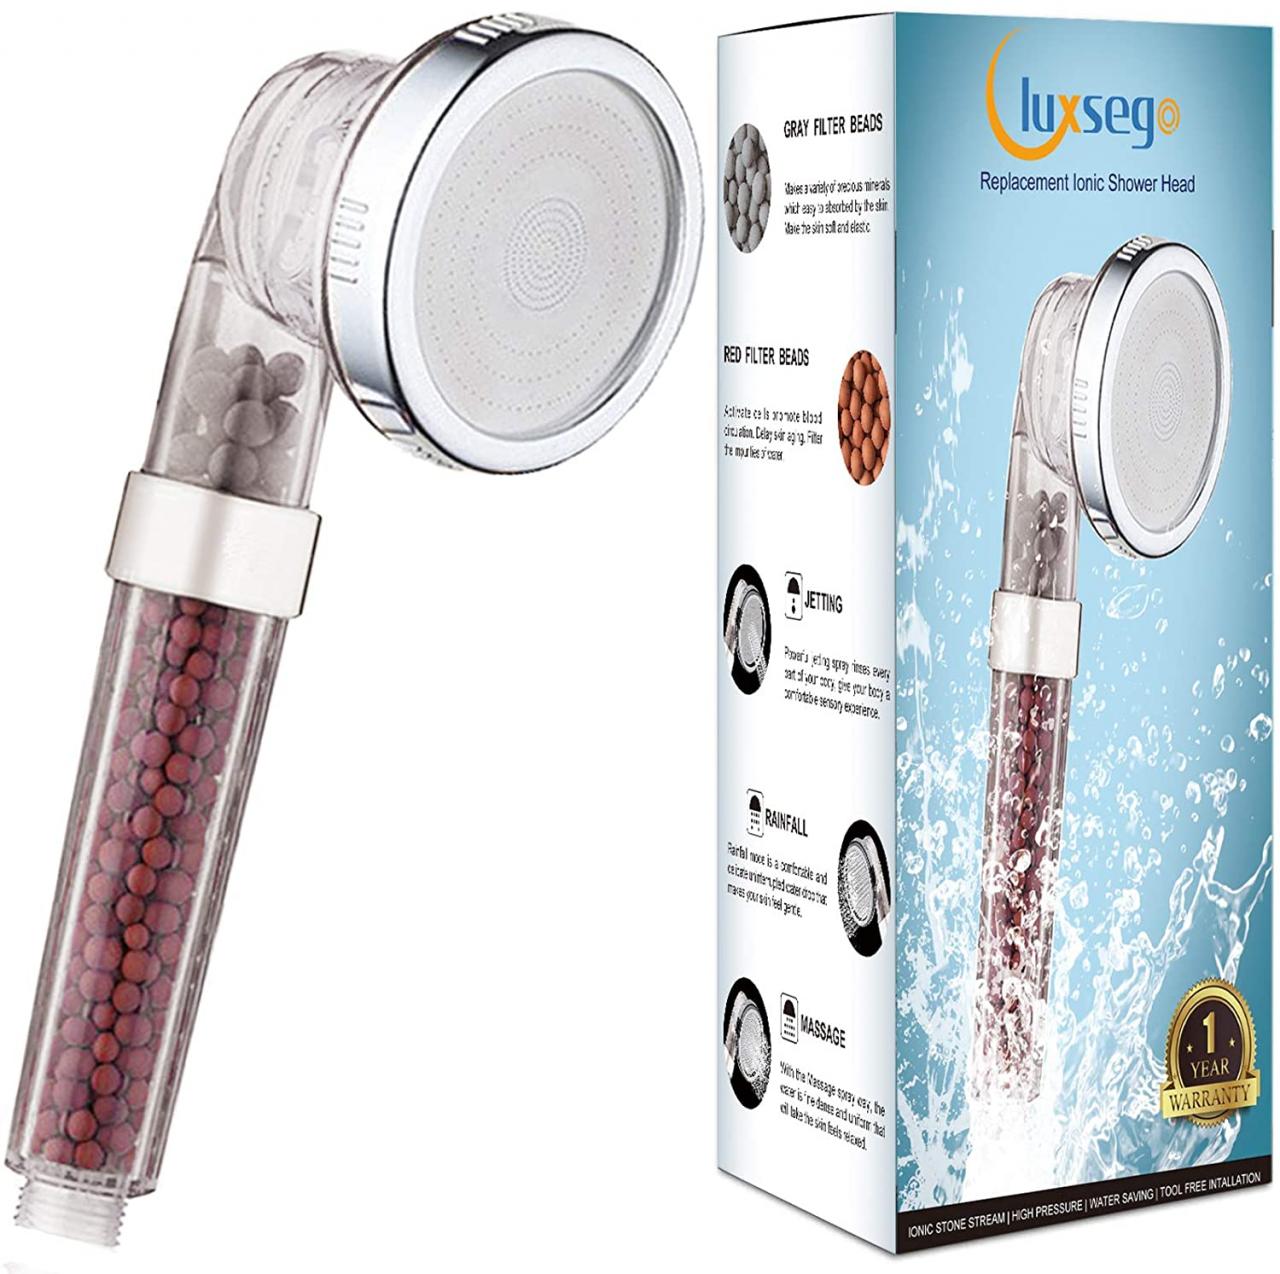 Luxsego Ionic Shower Head Review (September 2021)